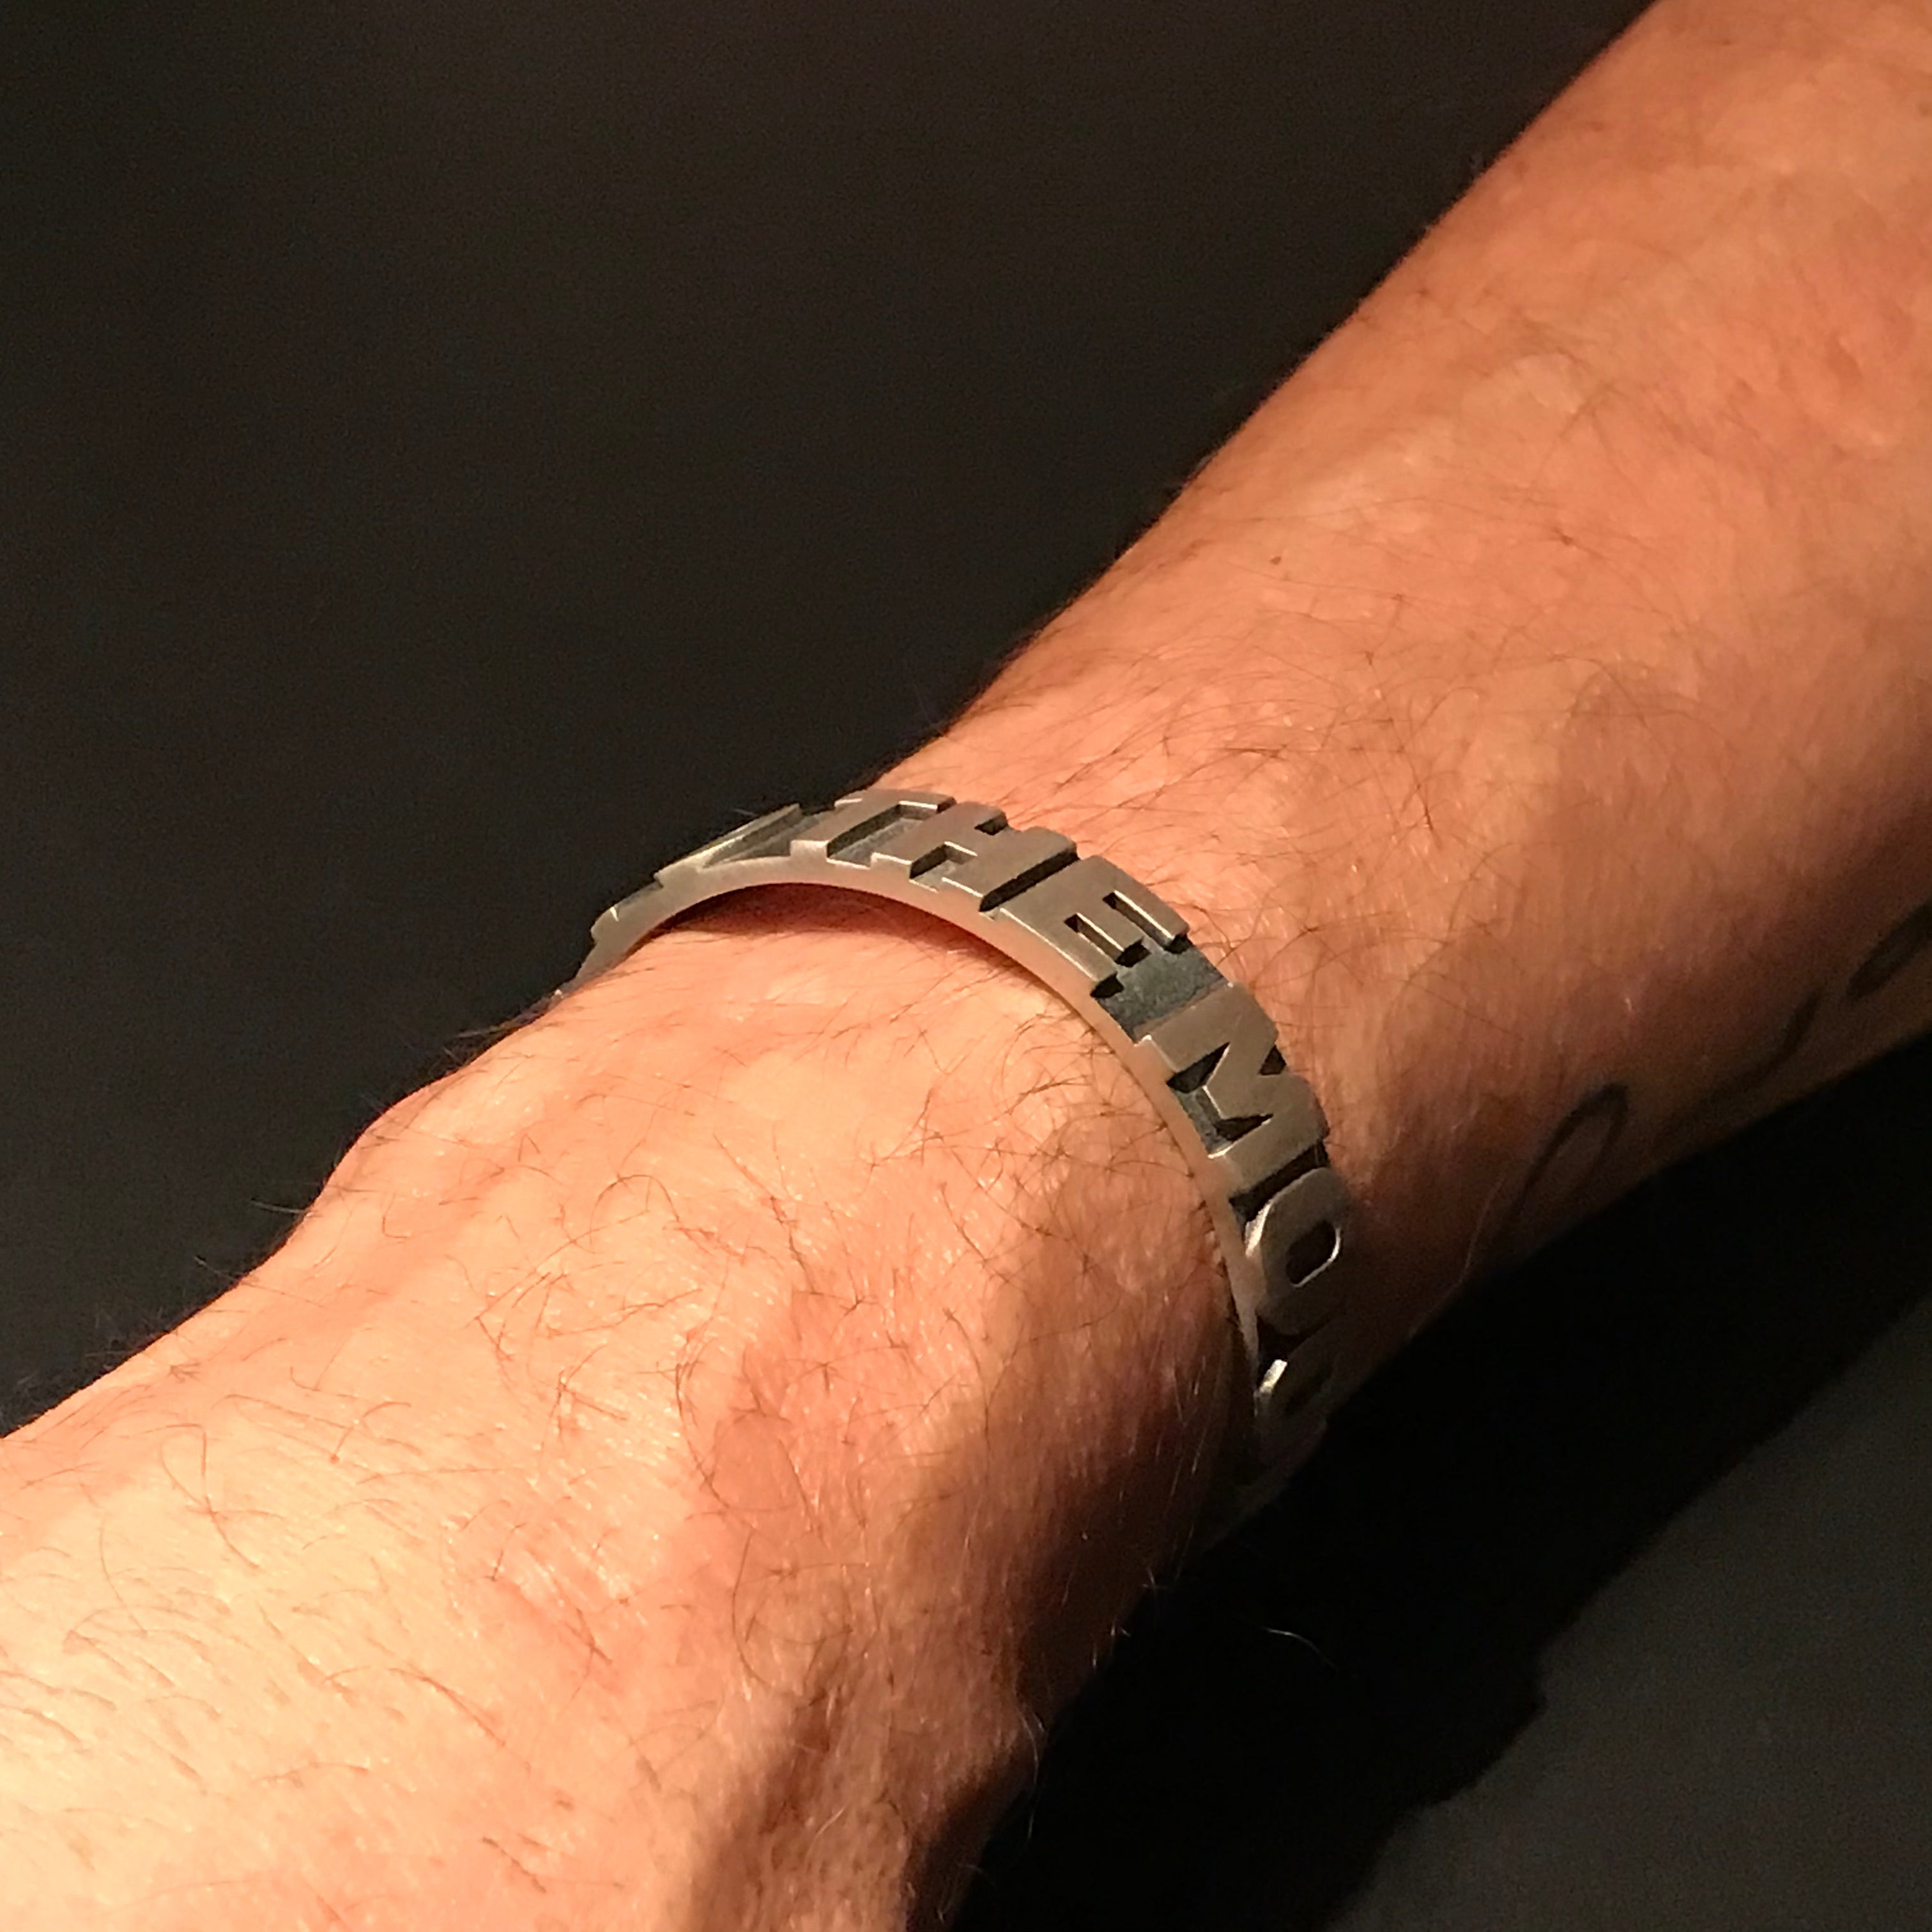 FOUND AT GALLERI PLATINA STOCKHOLM For HIM Cuff/ Open Bracelet  FLY ME TO THE MOON